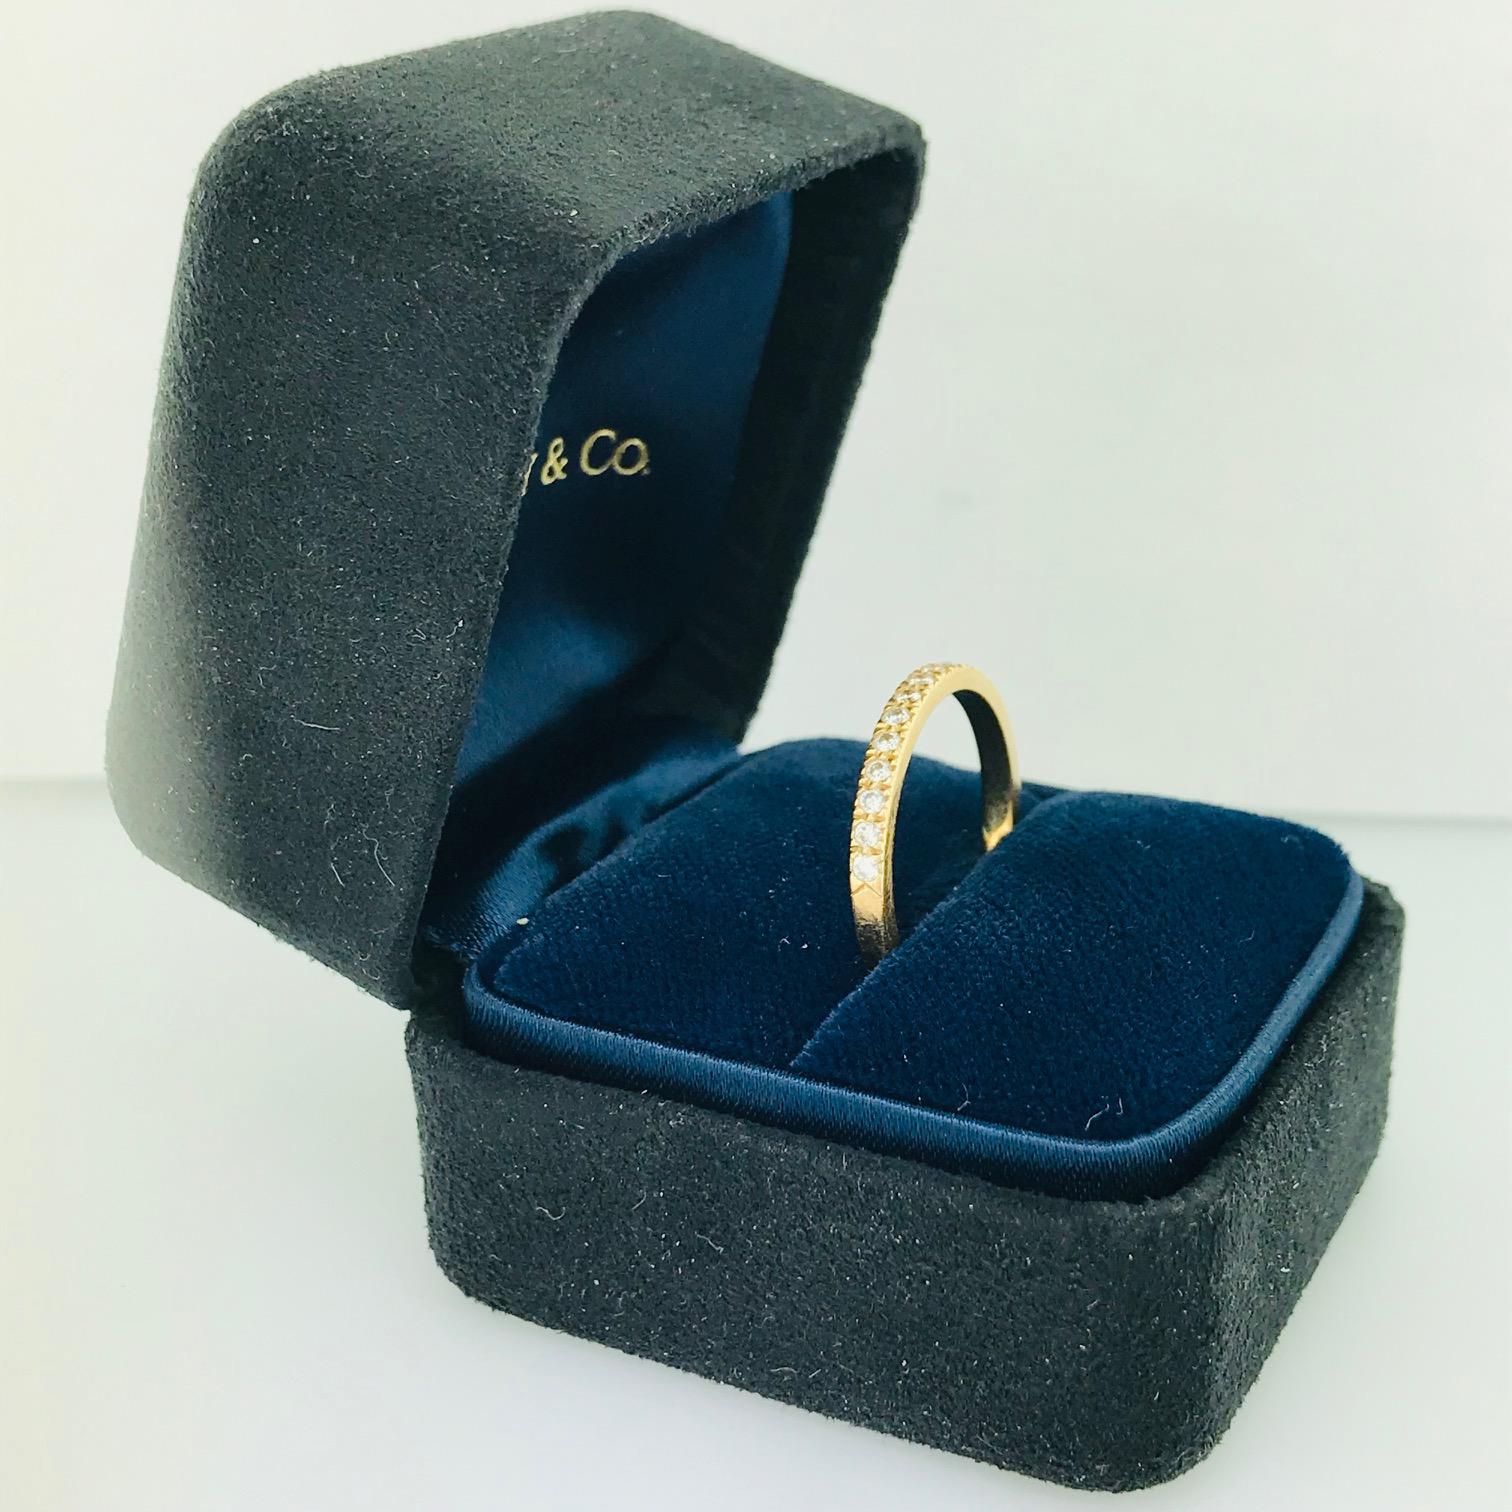 This is a Tiffany & Co. original piece with the original box. The 18 karat rose gold diamond band is stunning with bright white round brilliant diamonds. This ring has .30 carats total diamond weight and VS2 clarity and G color diamonds.  Always the